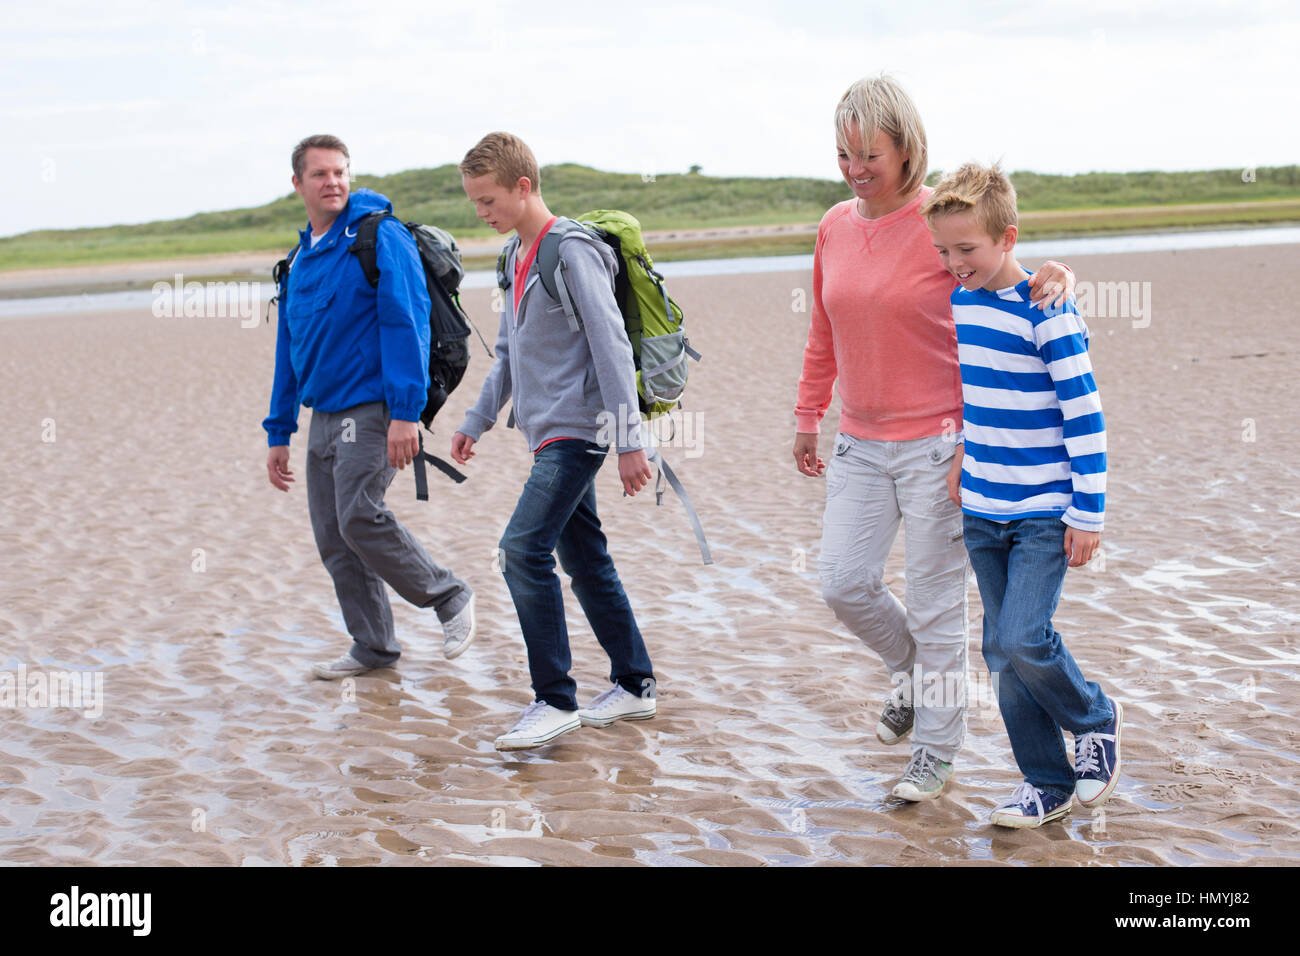 Family of four walking across the beach. They are wearing warm casual clothing with backpacks and look very happy. Stock Photo